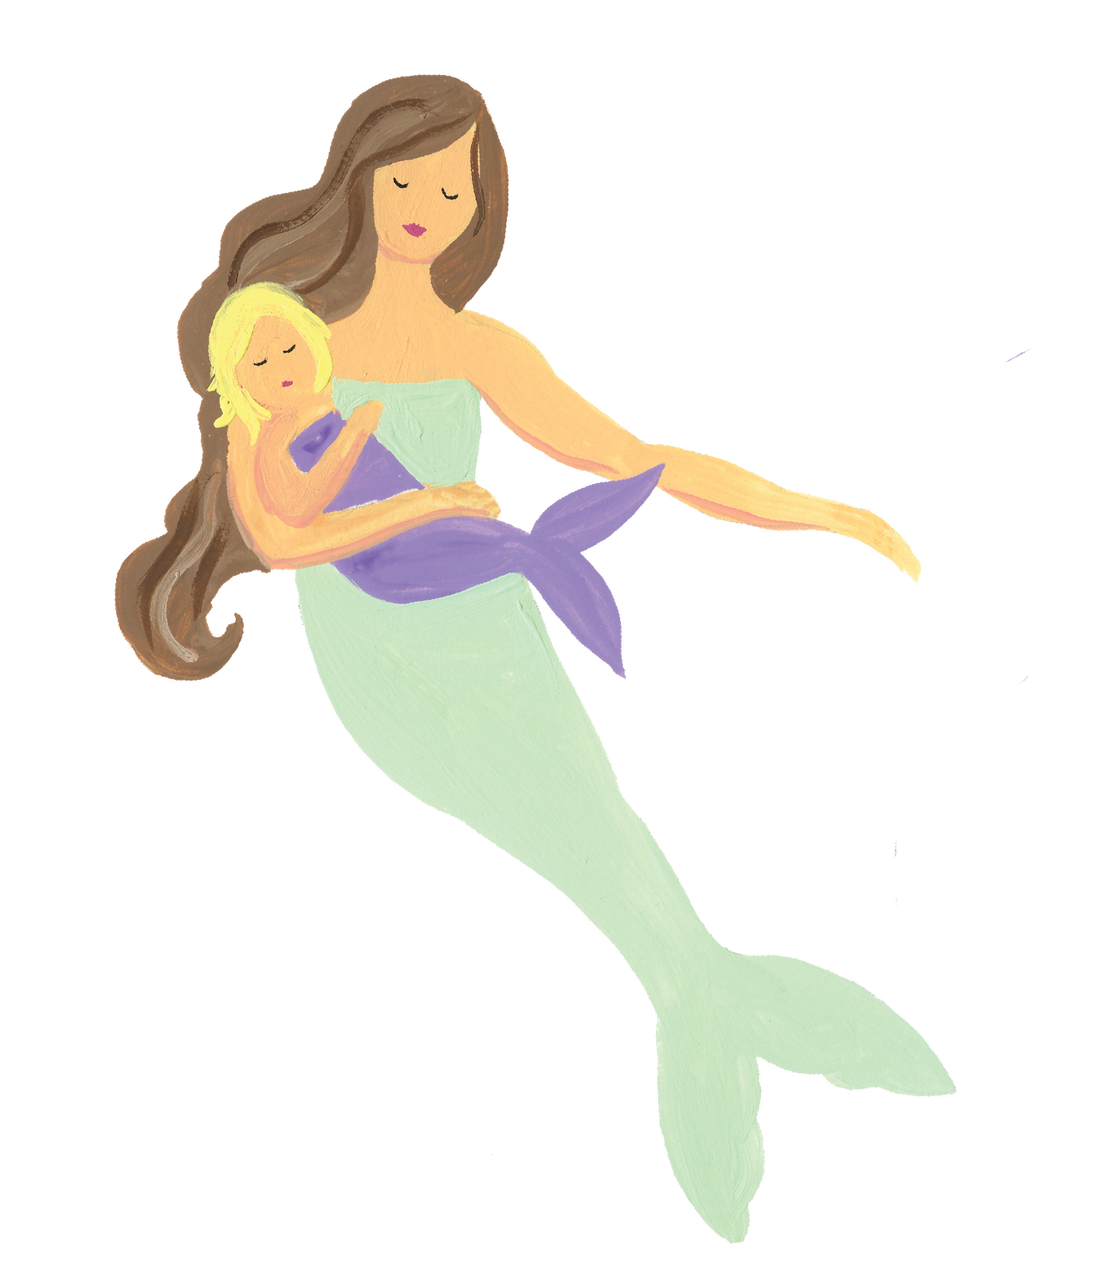 Mermaid with Baby Print & Cut File - Snap Click Supply Co.